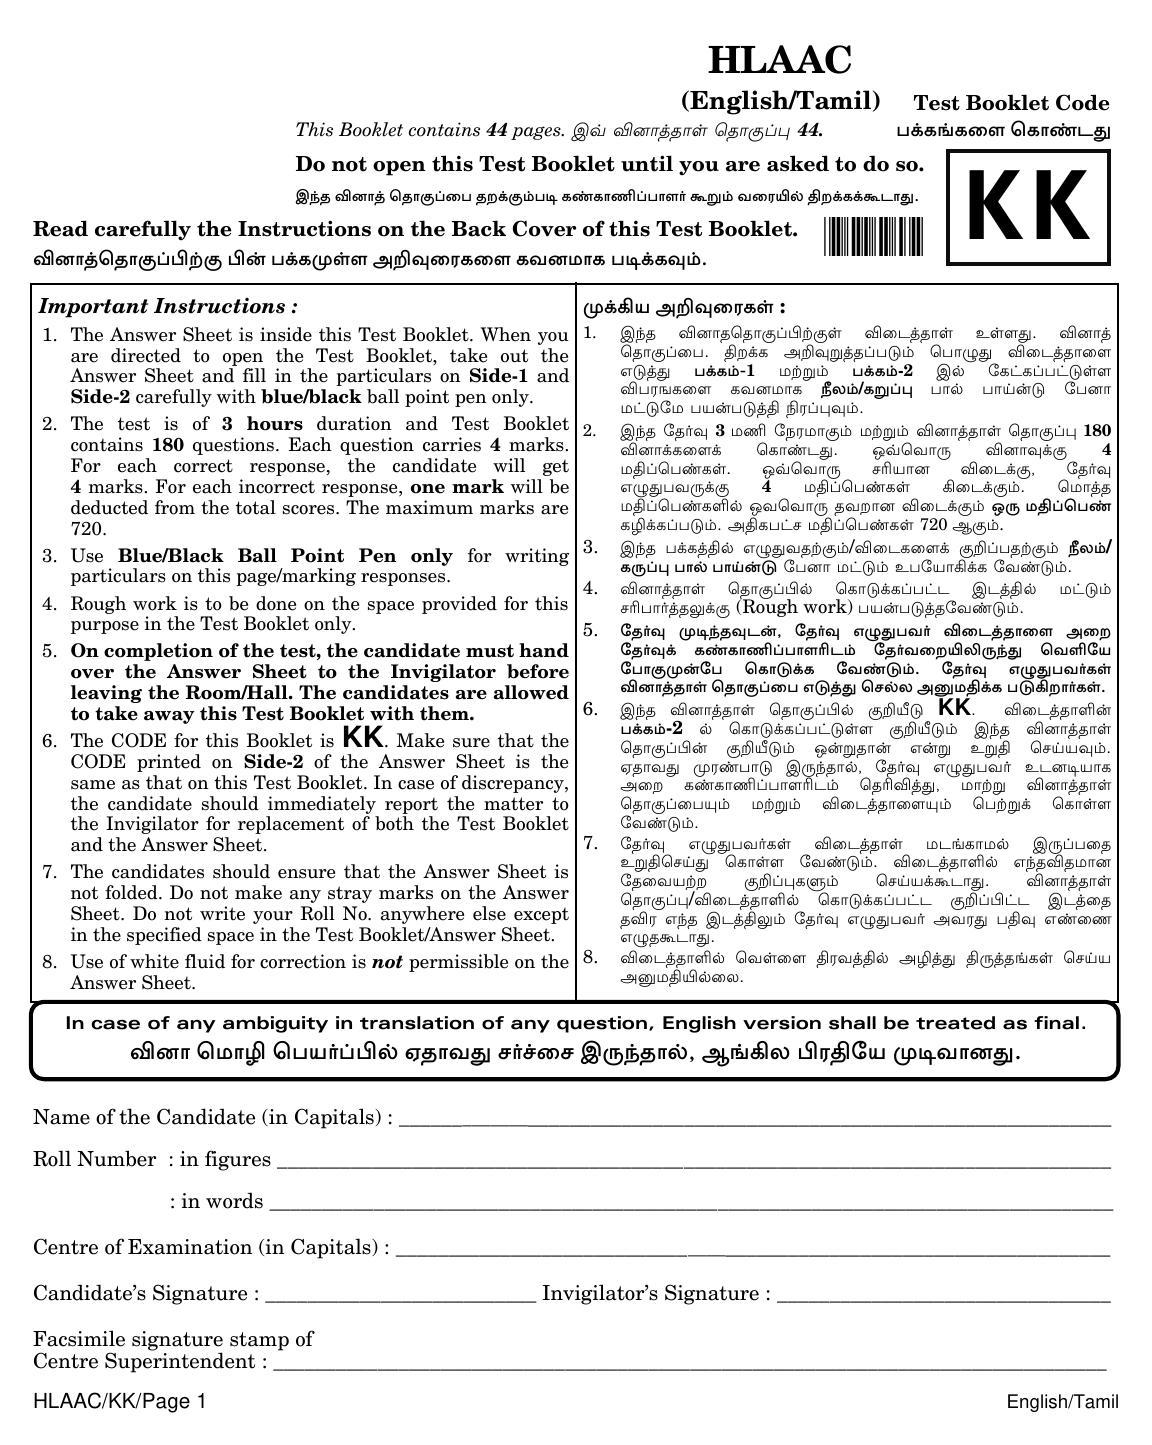 NEET Tamil KK 2018 Question Paper - Page 1